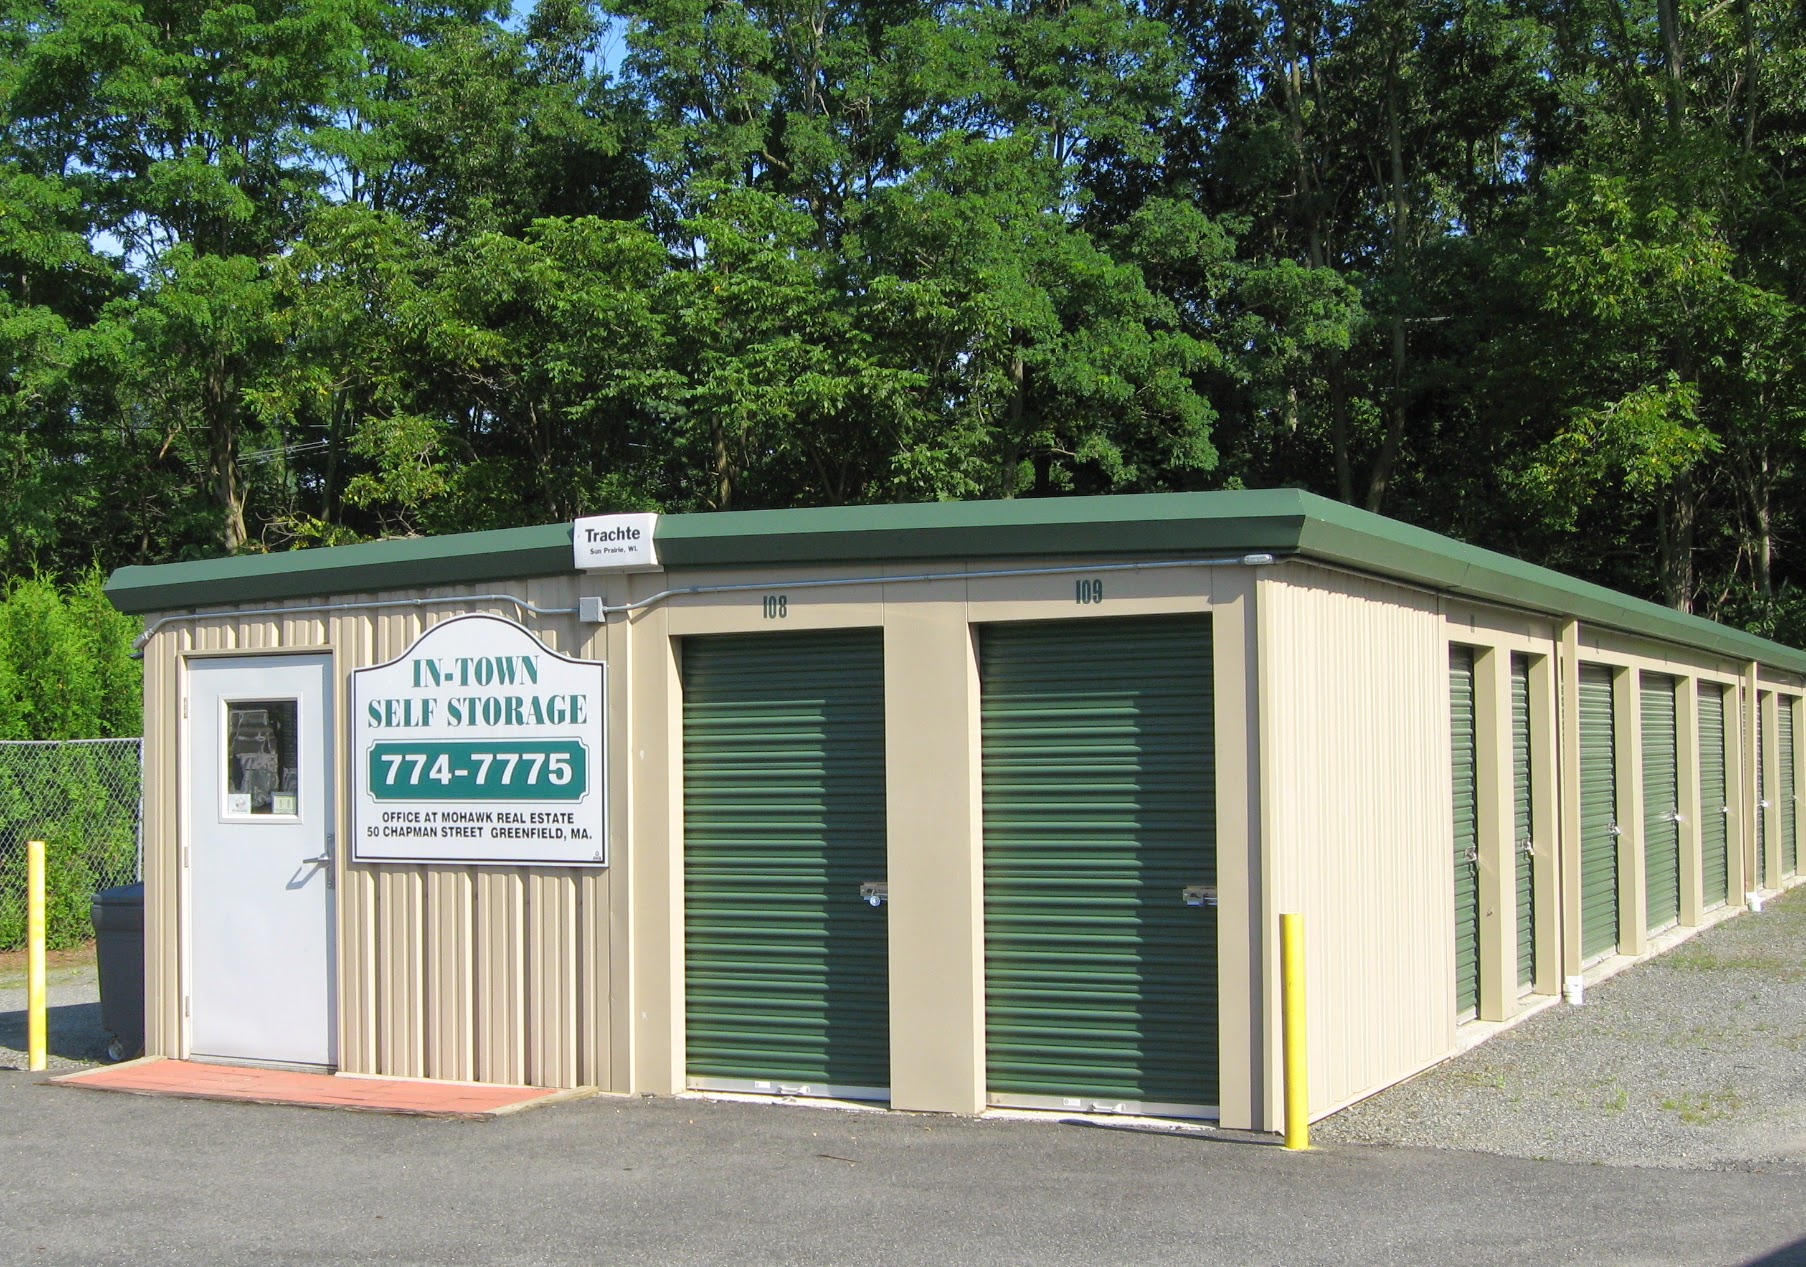 In-Town Self Storage